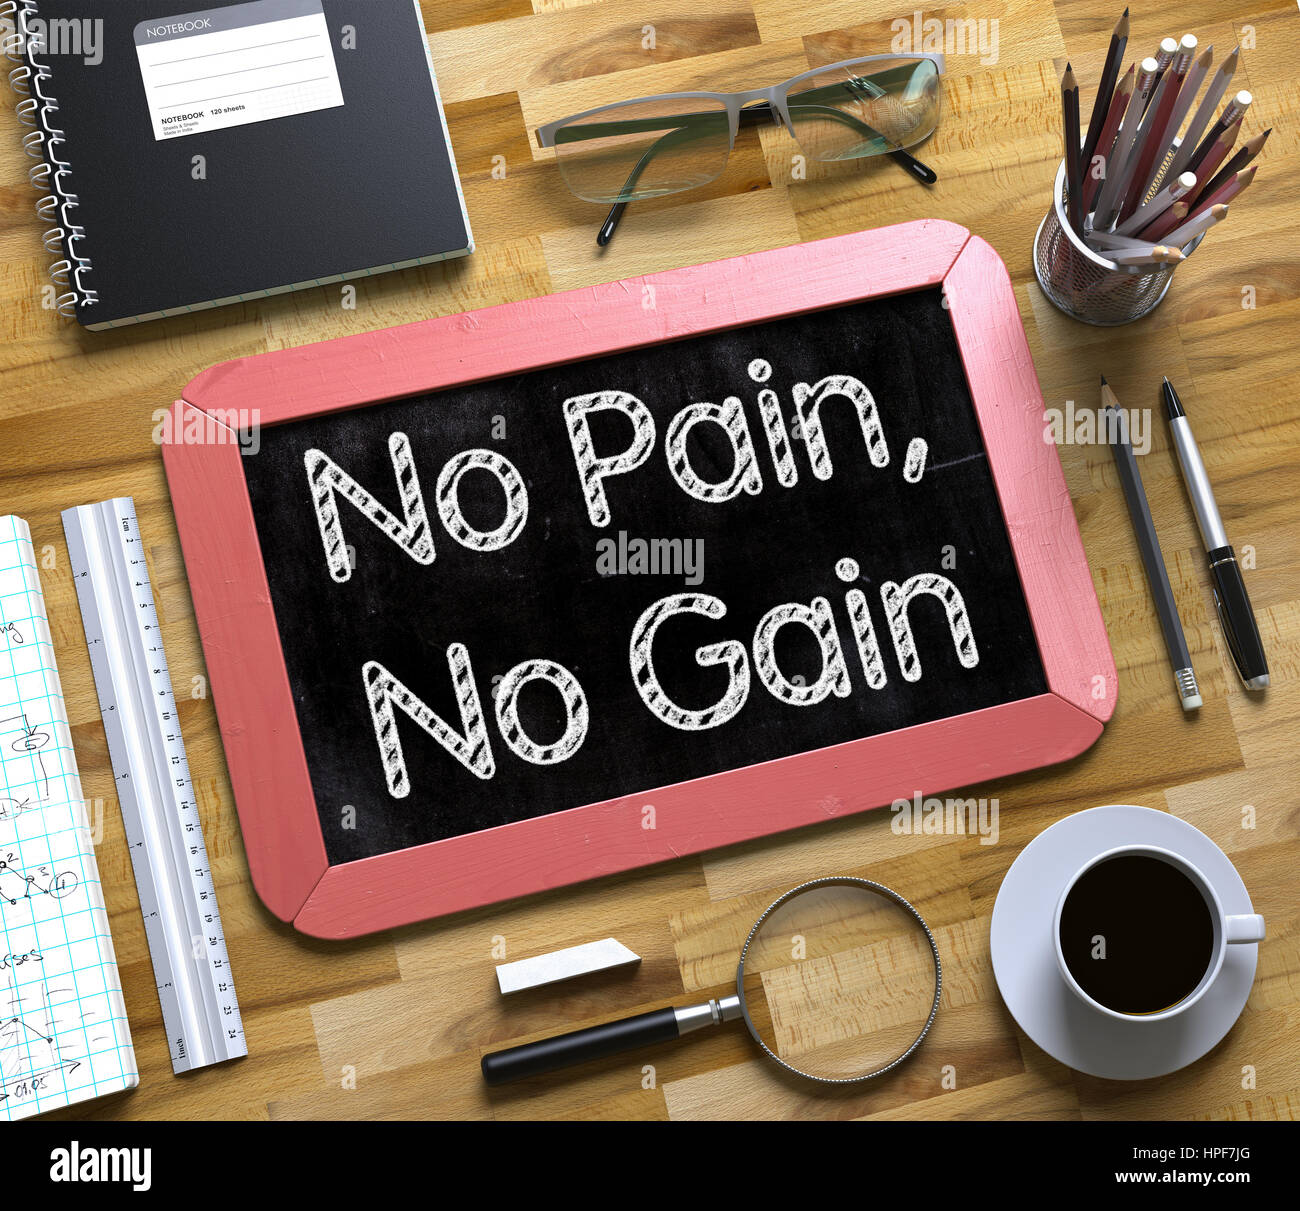 No Pain, No Gain on Small Chalkboard. No Pain, No Gain Handwritten on Red  Small Chalkboard. Top View of Wooden Office Desk with a Lot of Business and  Stock Photo - Alamy